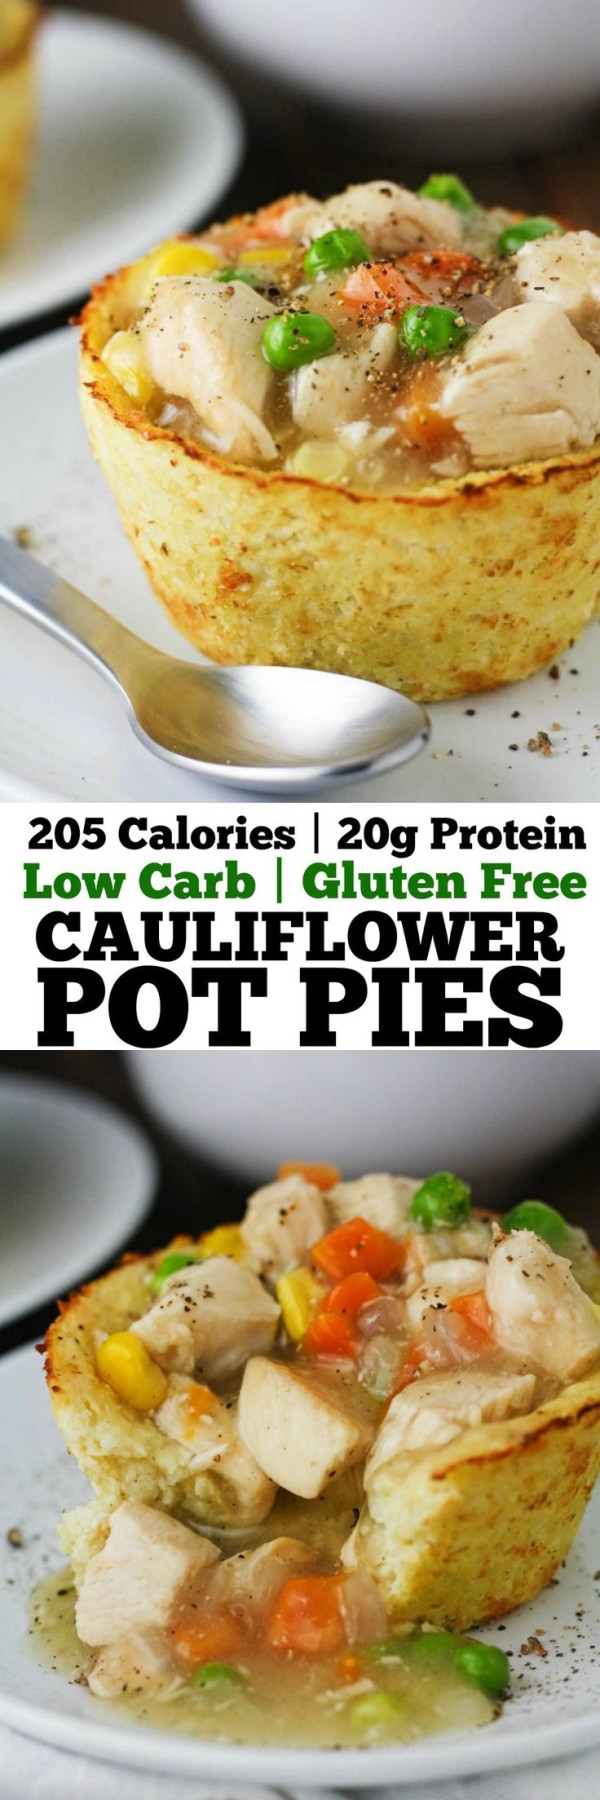 Low Calorie Chicken Pot Pie Recipes
 These Low Carb Cauliflower Pot Pies have all the flavors